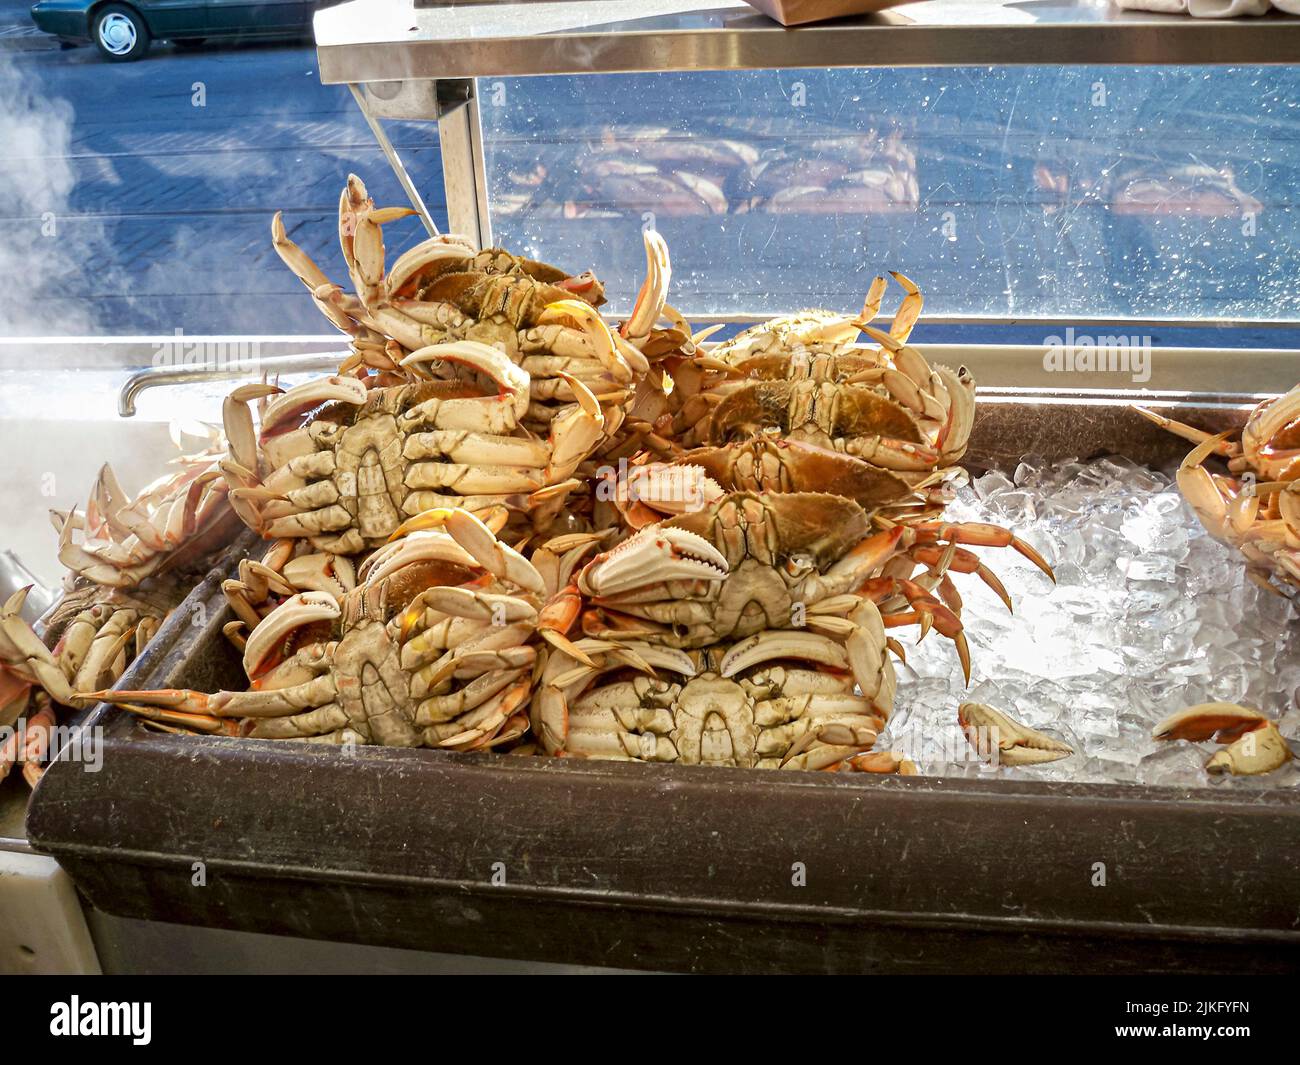 The Crabs in the seafood market Stock Photo